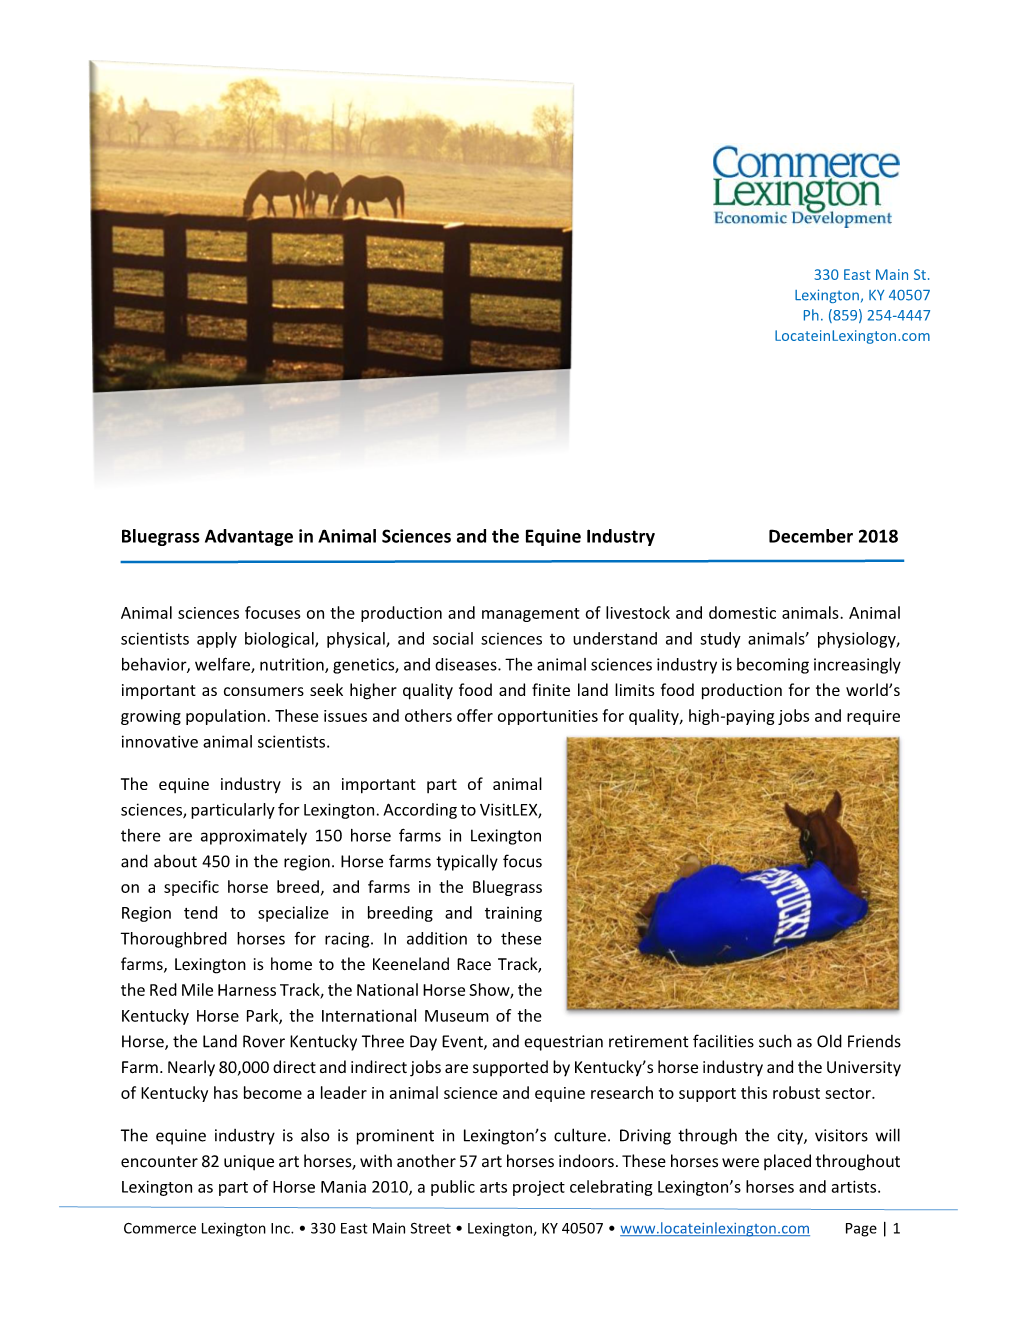 Bluegrass Advantage in Animal Sciences and the Equine Industry December 2018